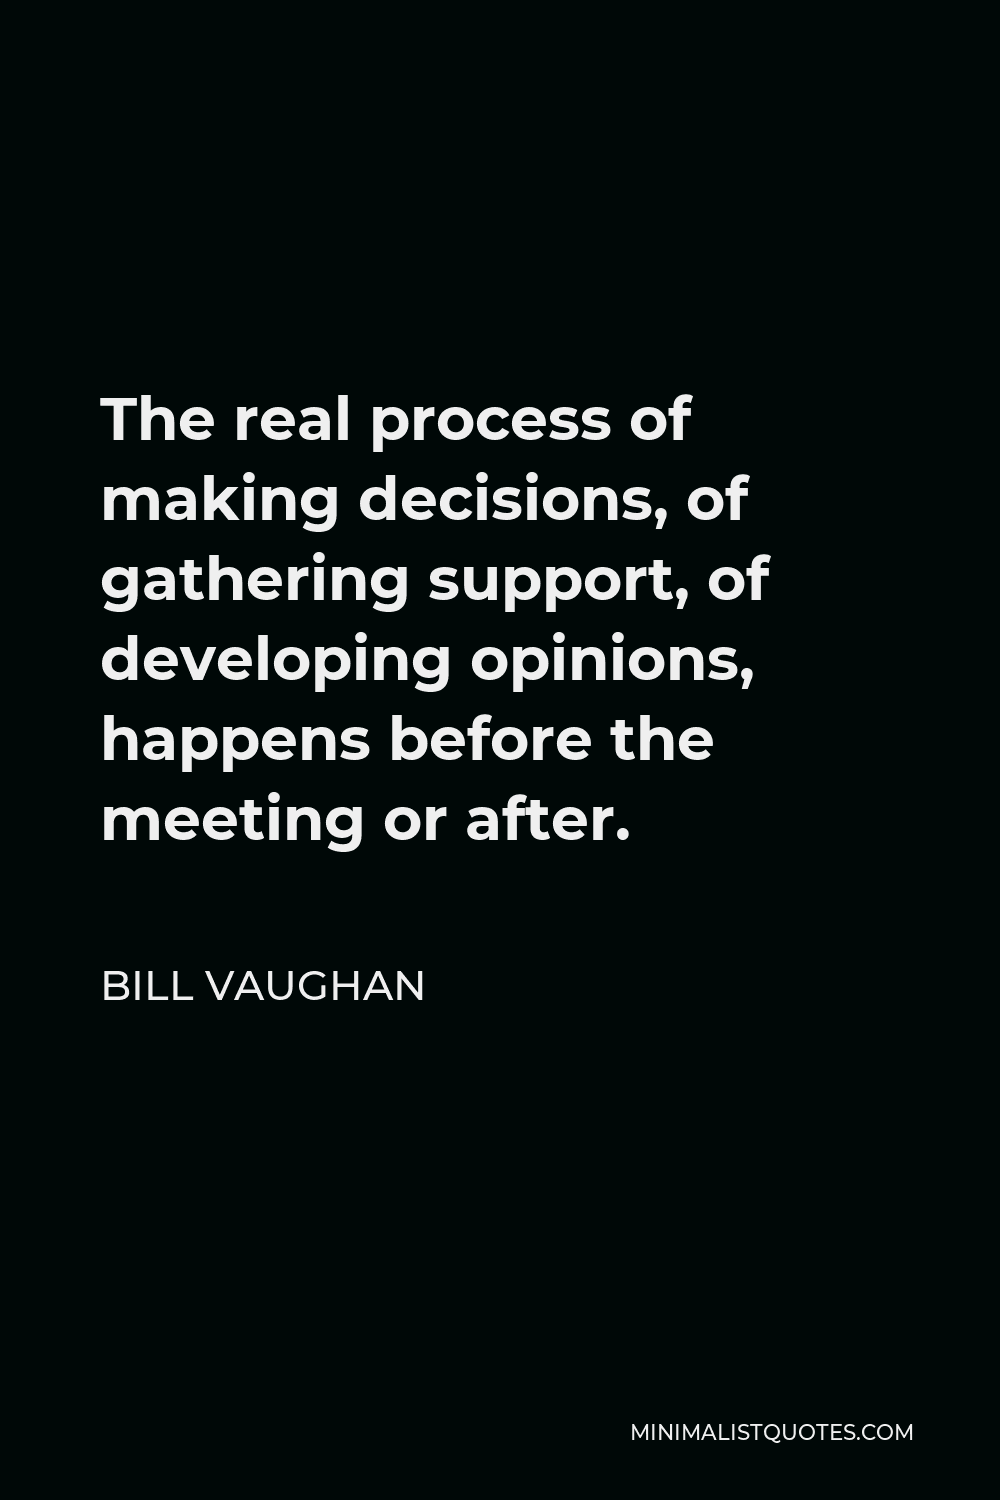 Bill Vaughan Quote - The real process of making decisions, of gathering support, of developing opinions, happens before the meeting or after.